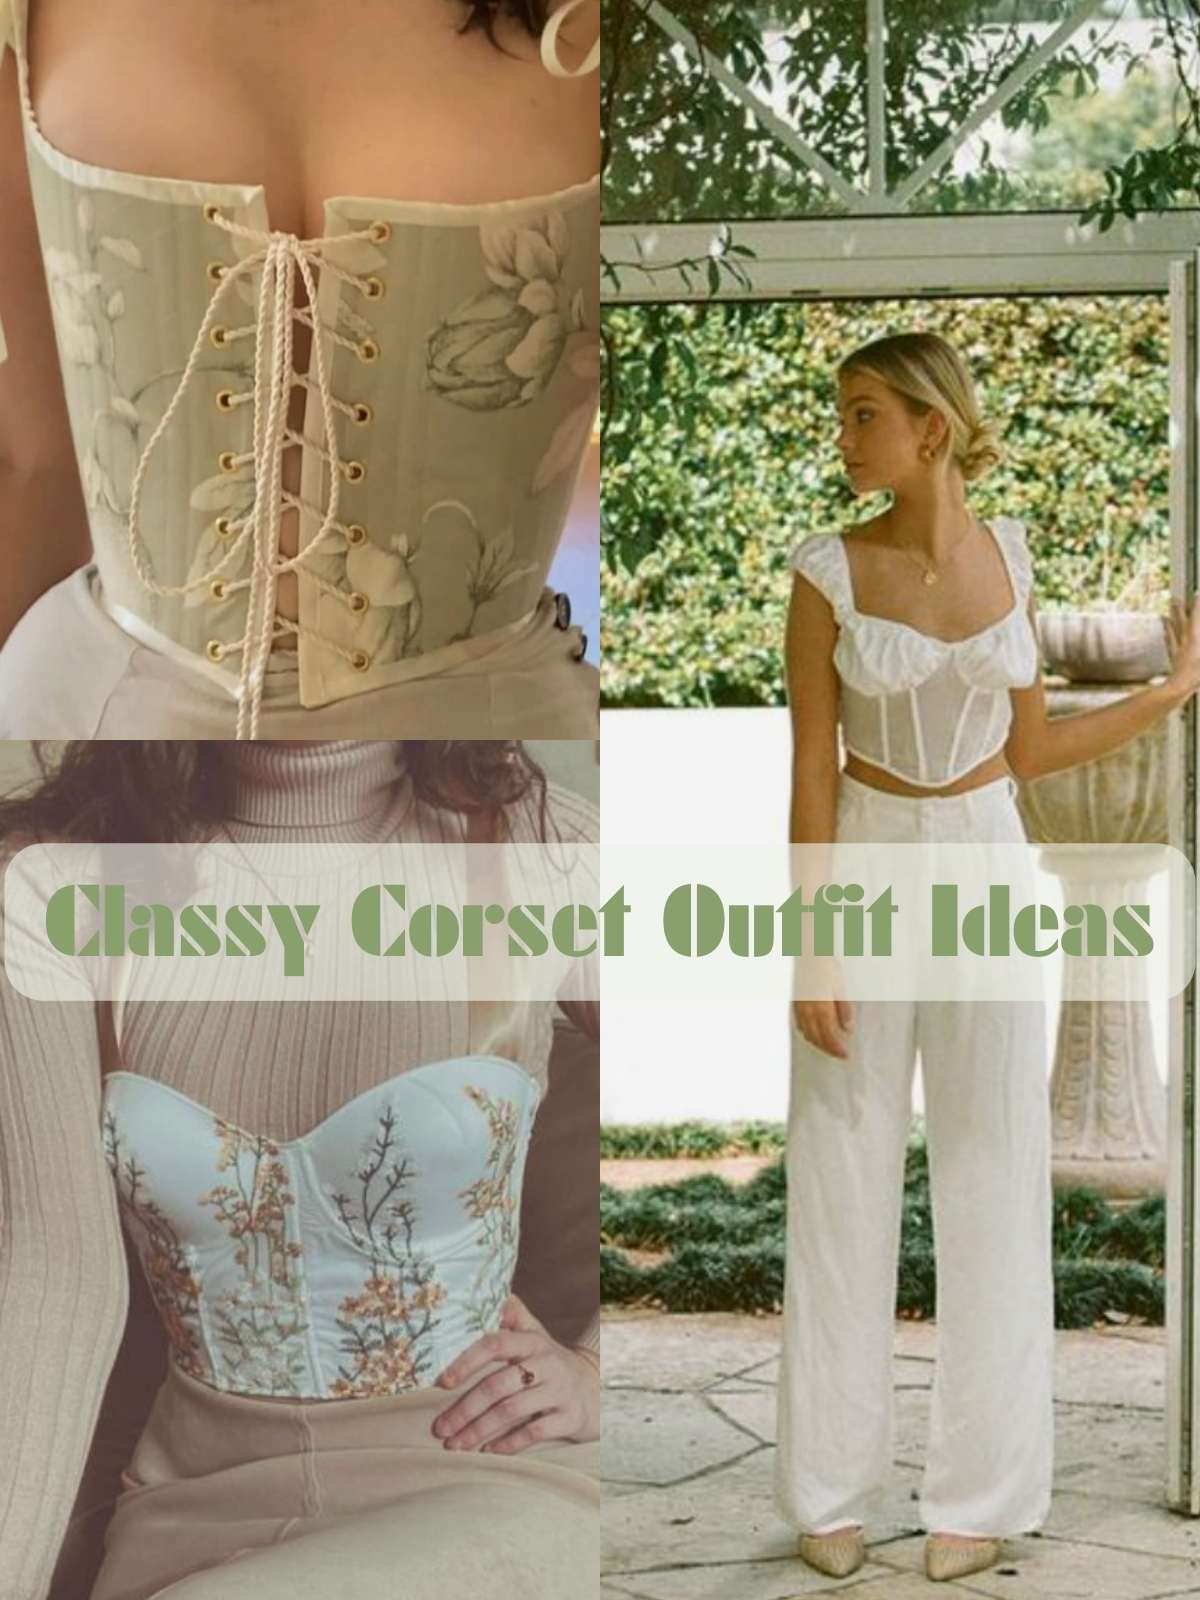 Classy outfit ideas with different patterned corsets.